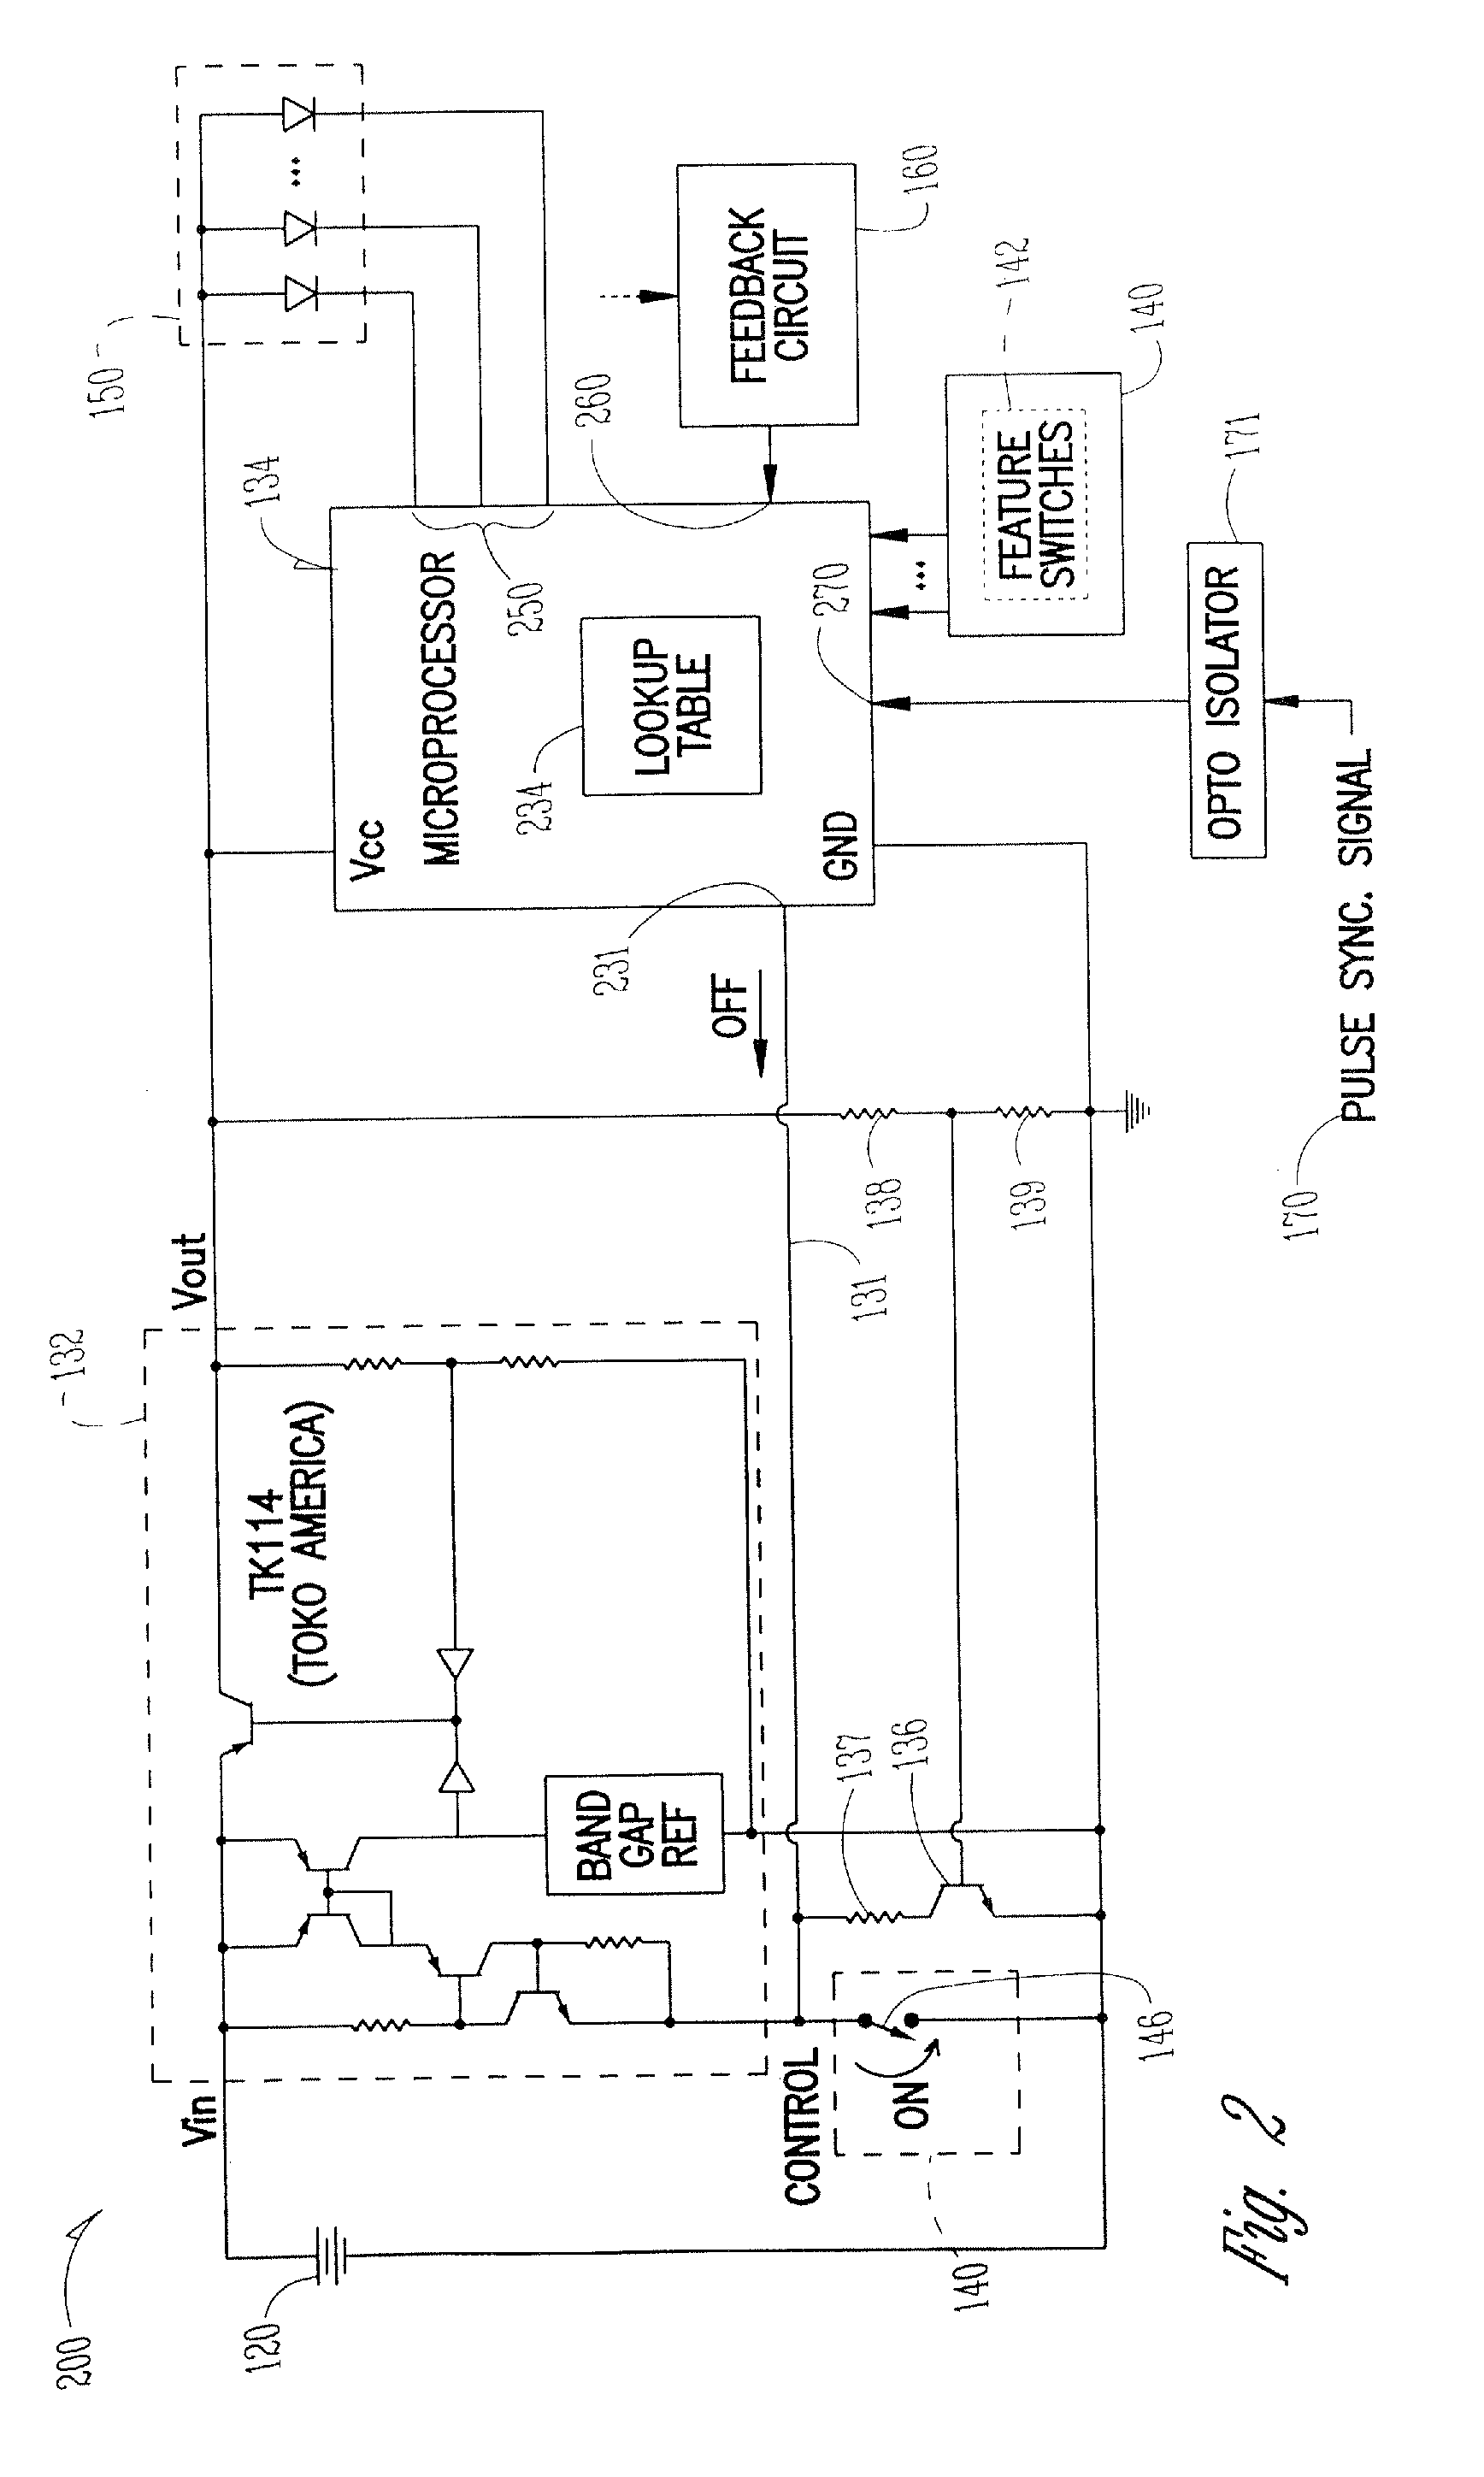 Method and apparatus for pulsed L.E.D. illumination for a camera